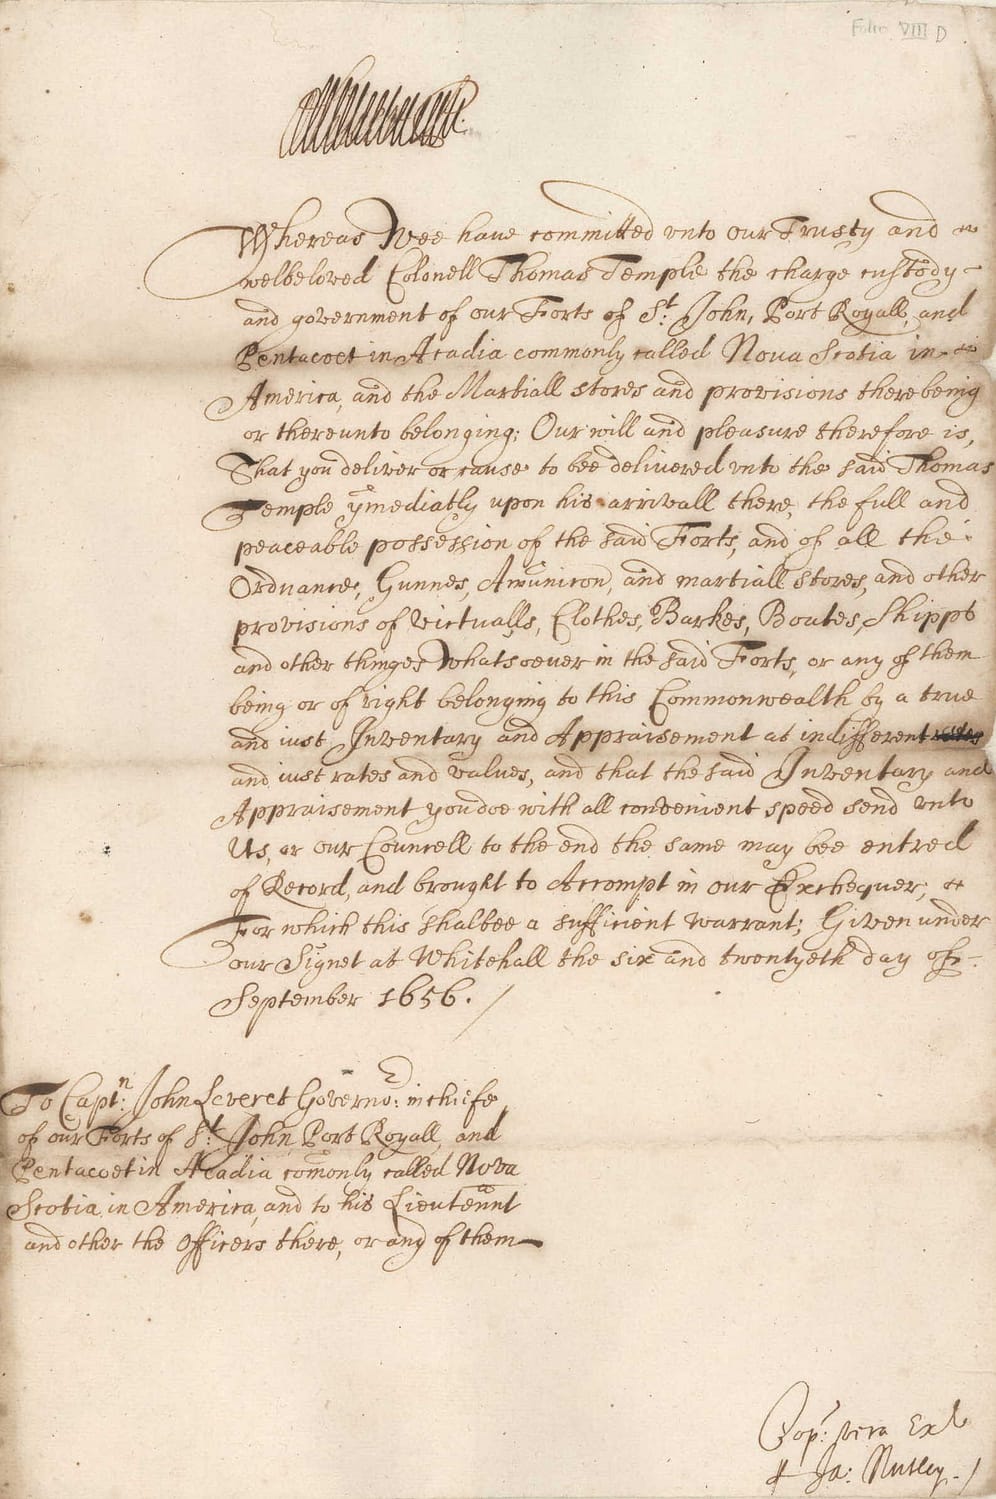 Instructions from Oliver Cromwell to John Leverett (written by James Nutley), 26 September 1656